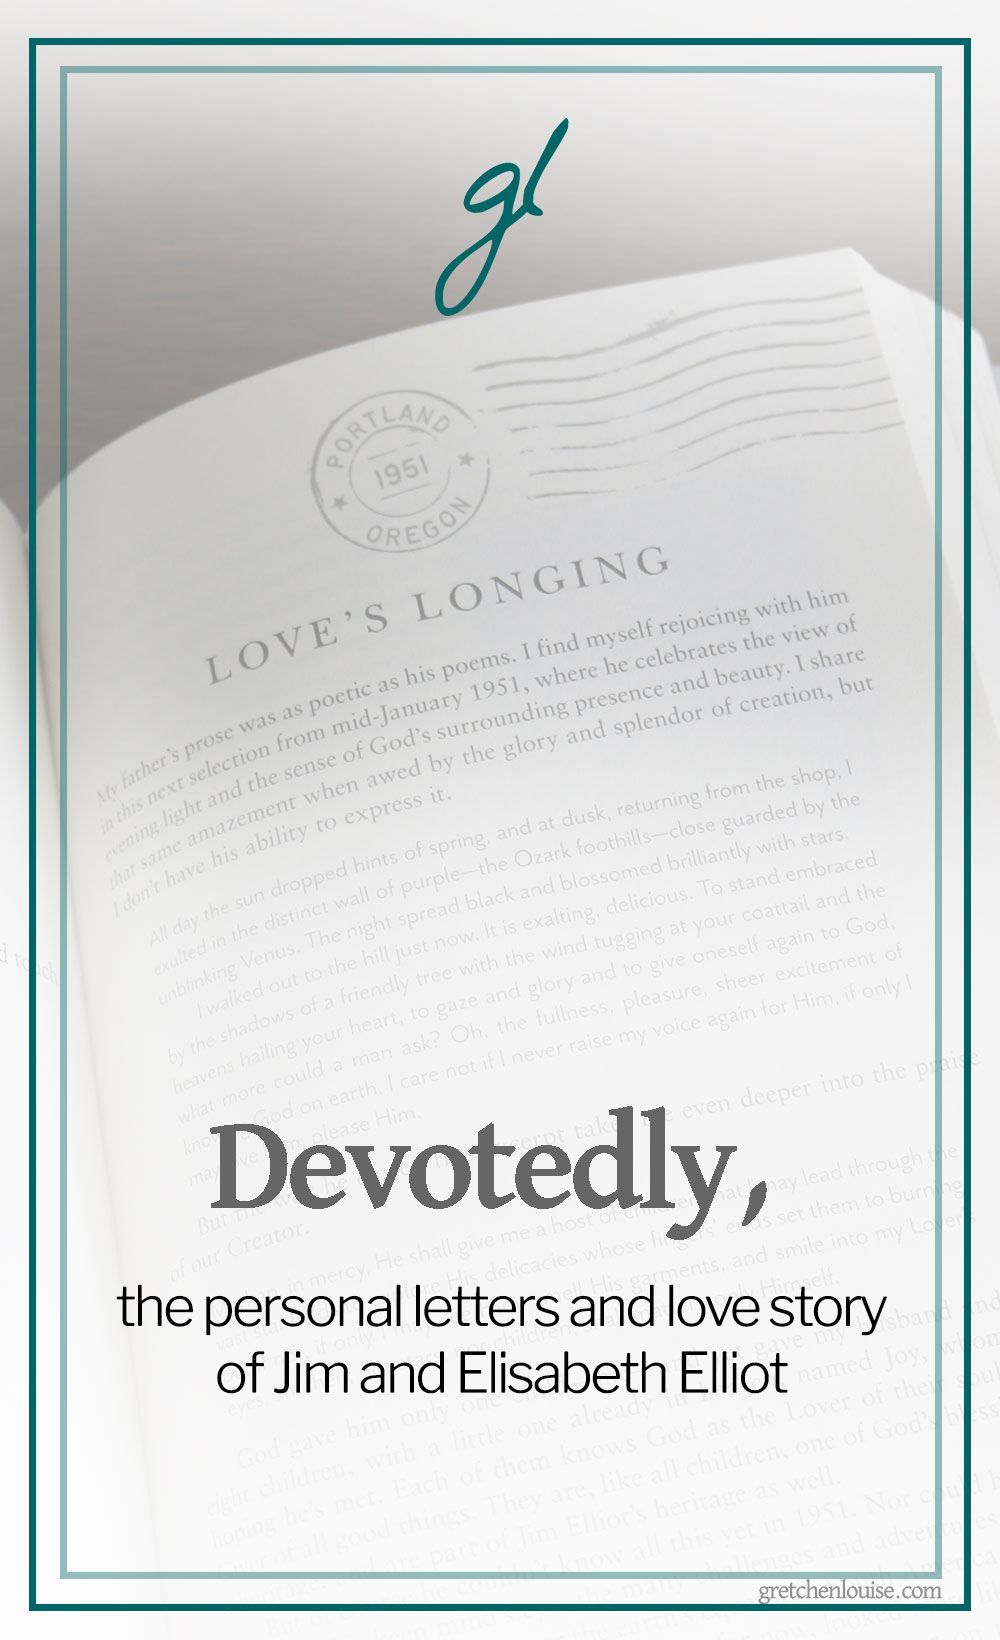 Devotedly is a riveting account of two people passionately in love with each other and purely devoted to serving the Lord. Devotedly is also a beautiful tribute to courtship by letter in a previous generation. via @GretLouise